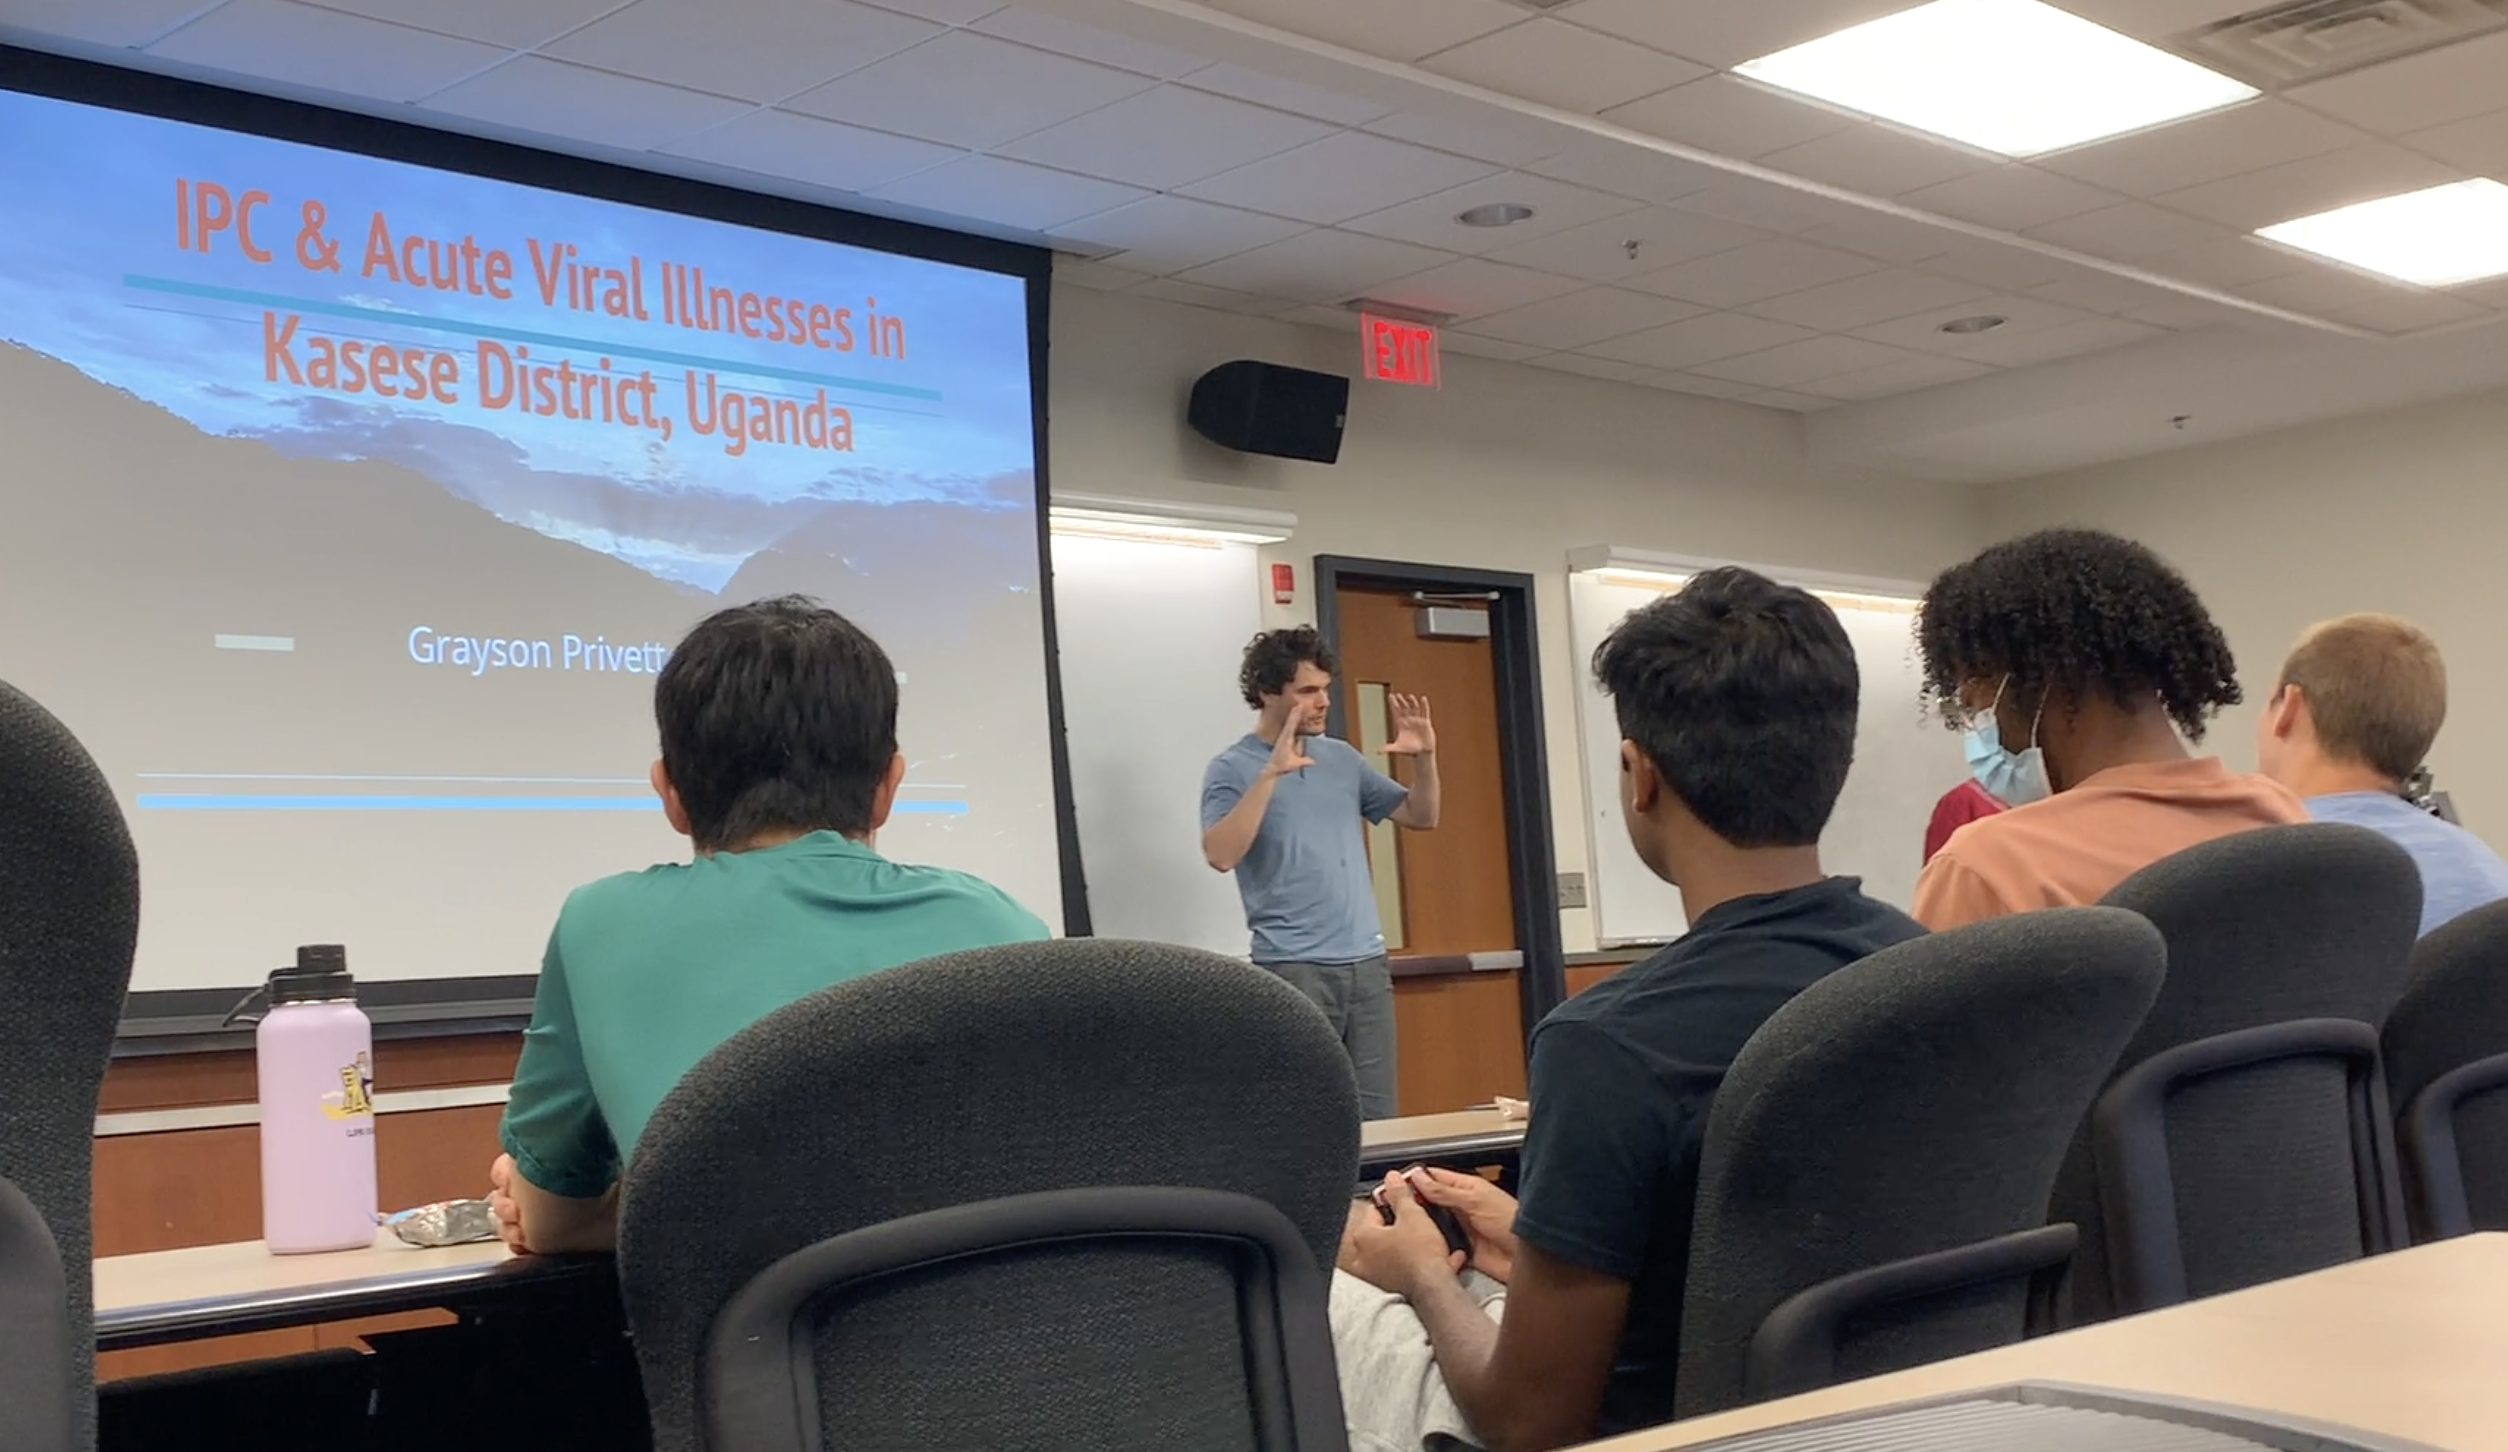 Professor presenting in front of a class.